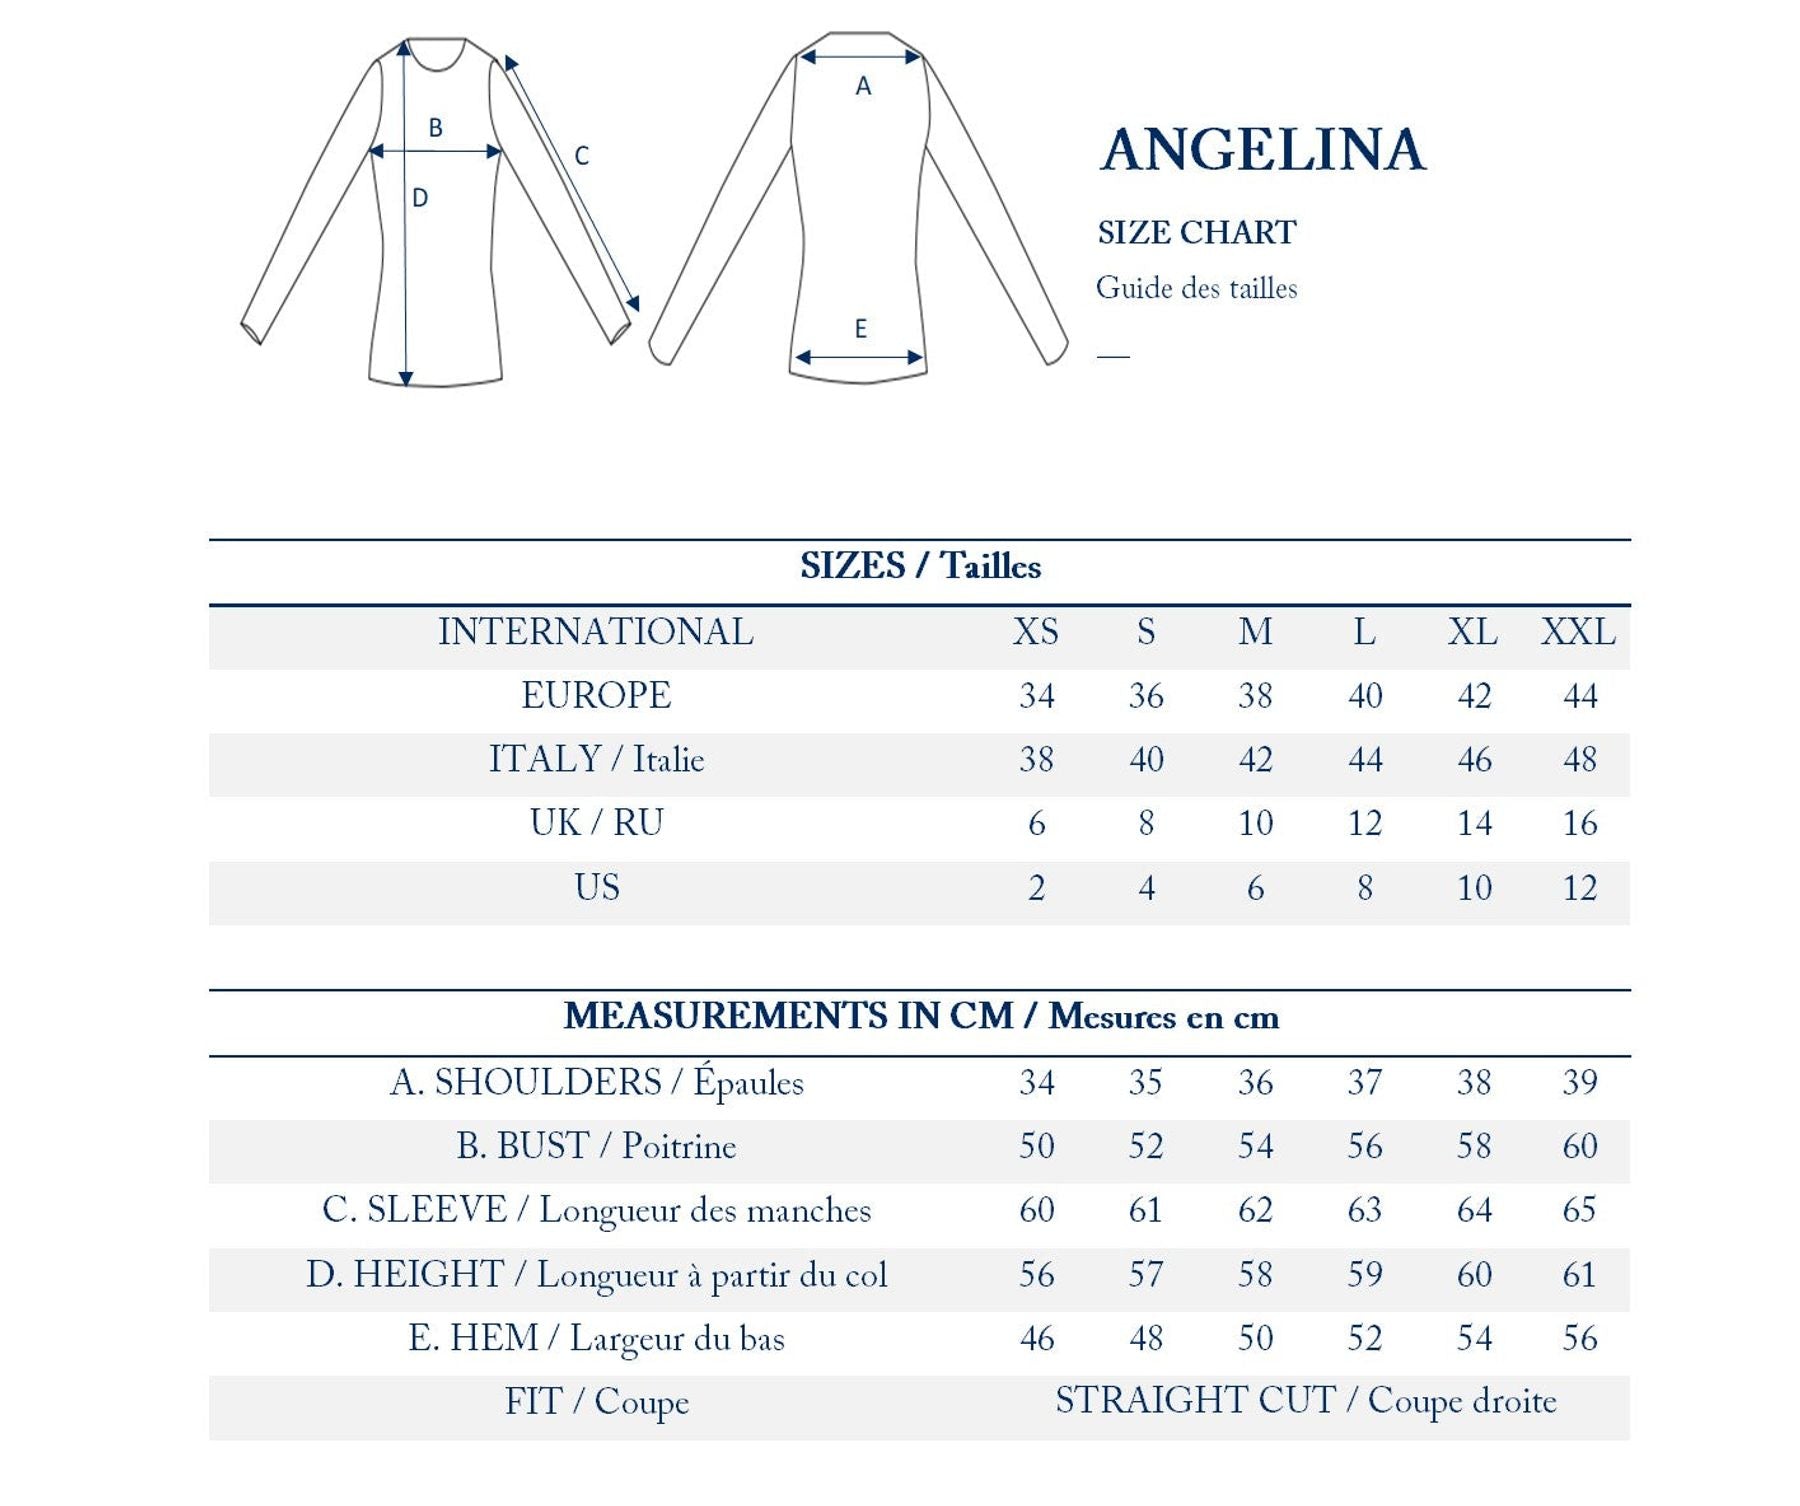 sweater-angelina-red